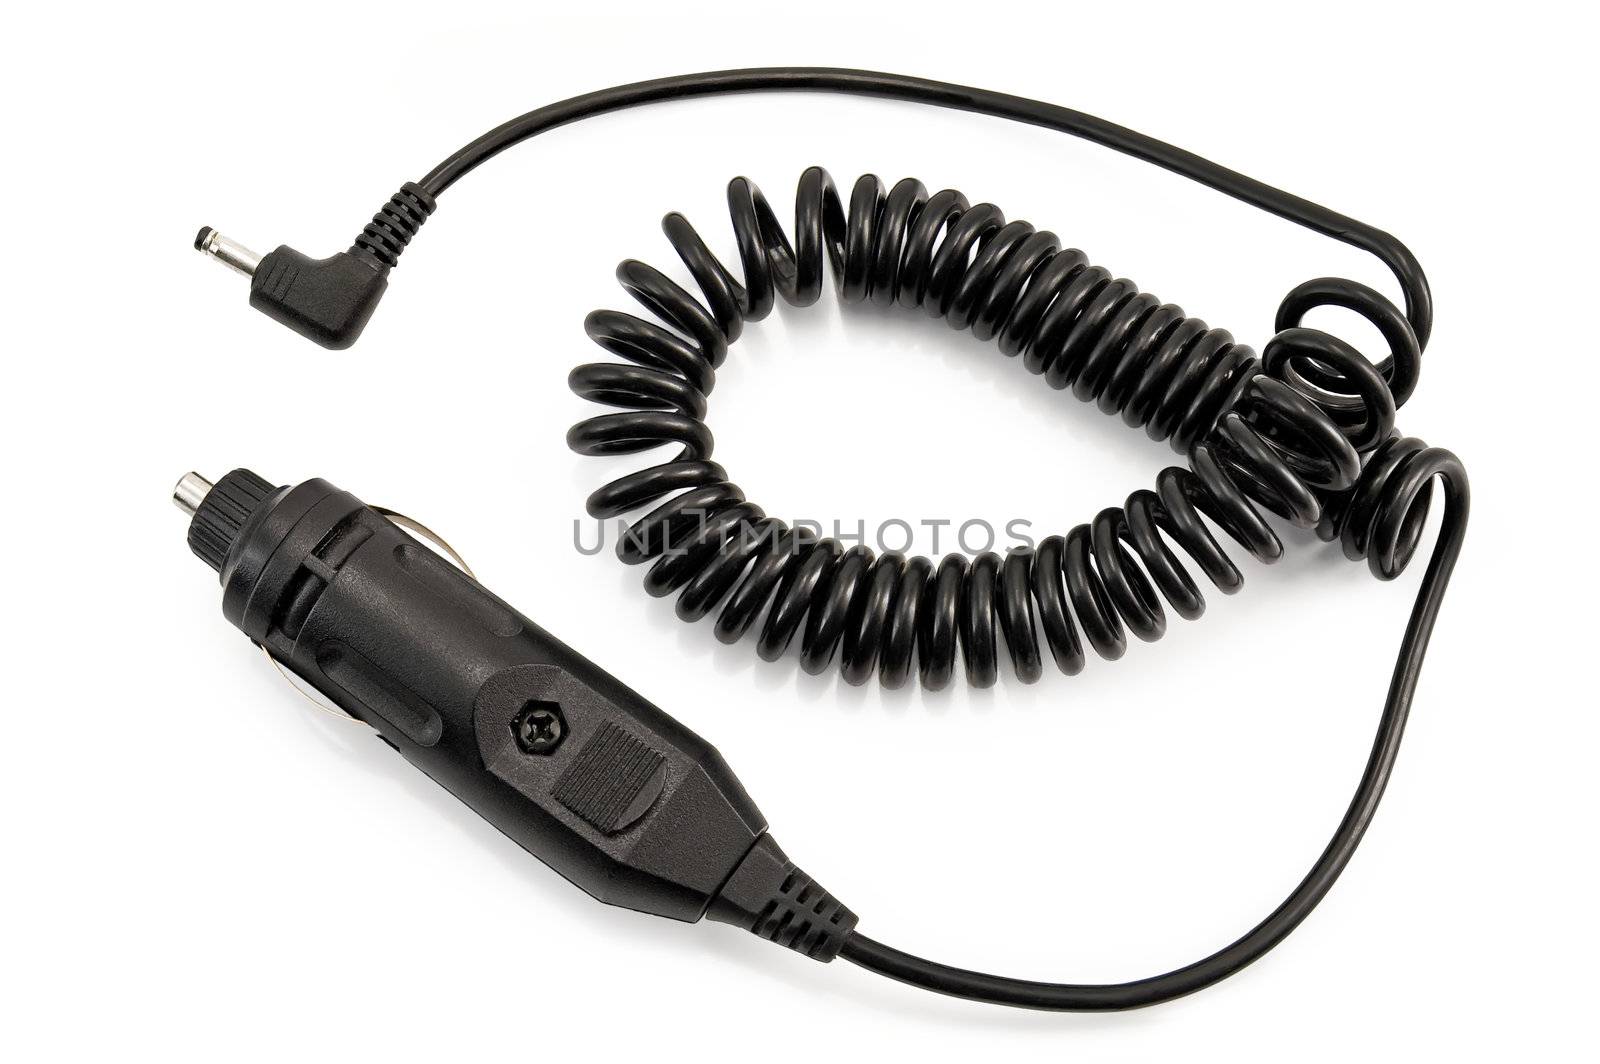 Black car adapter is isolated on a white background